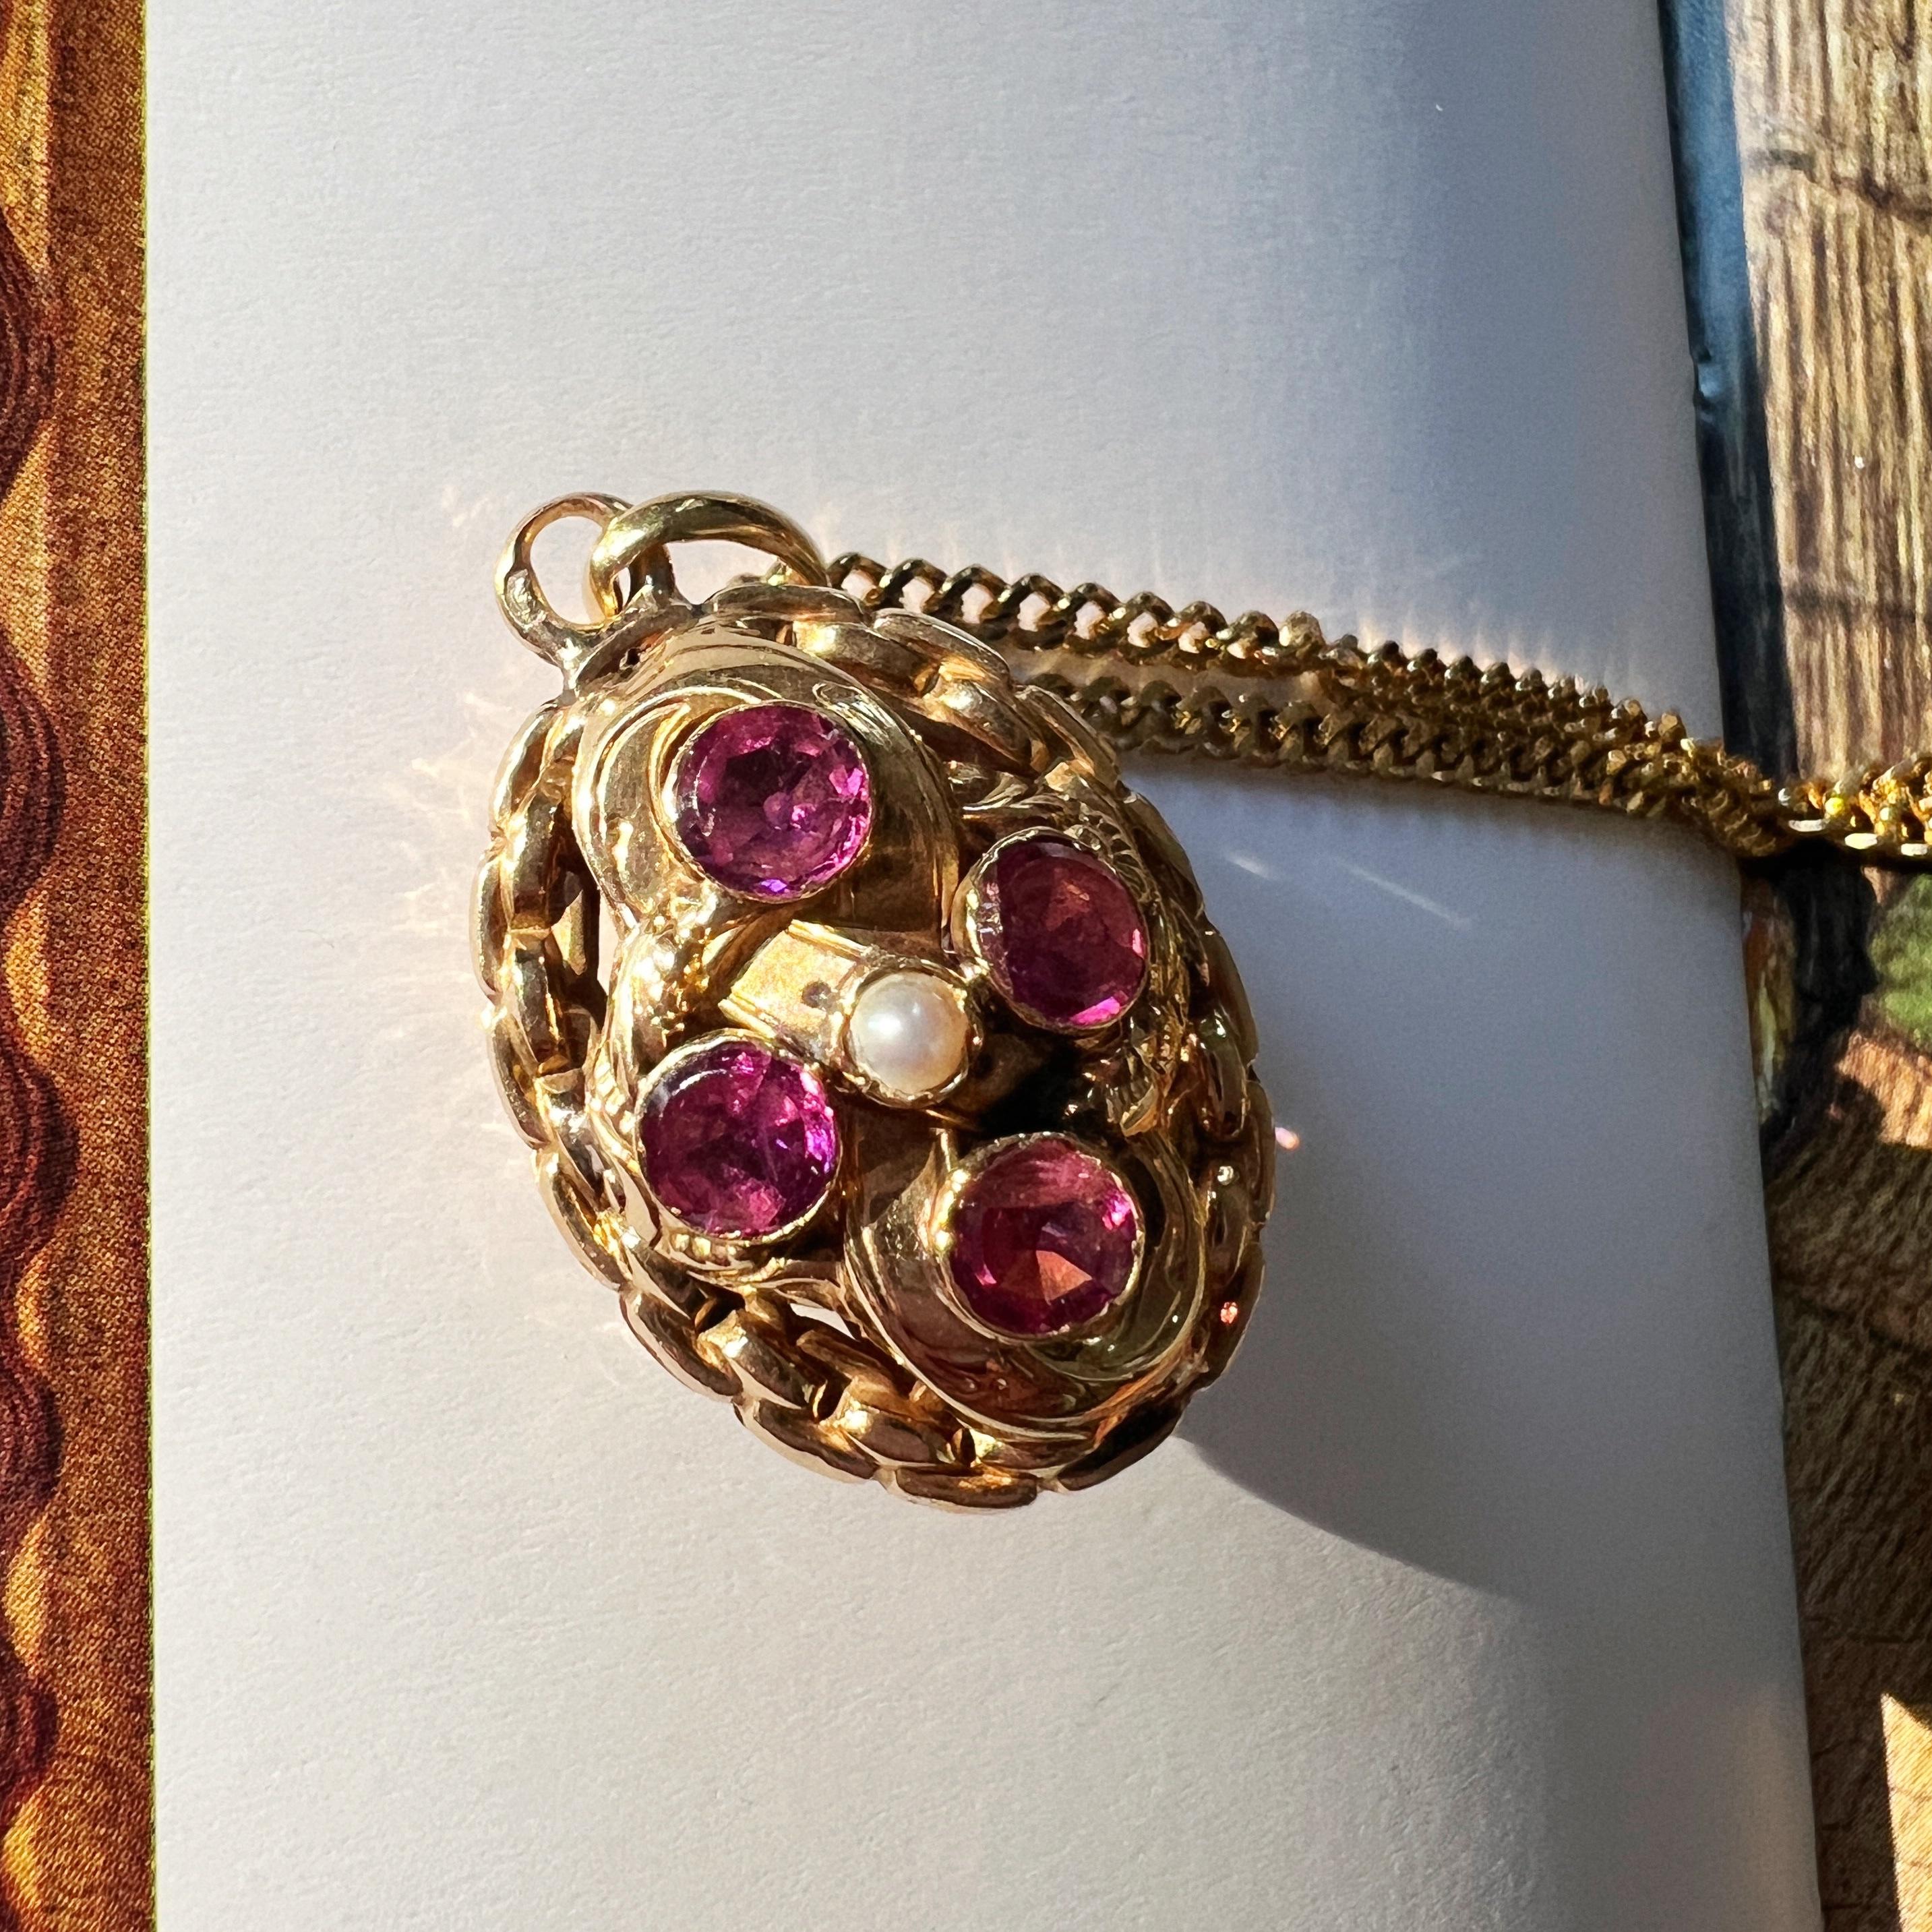 For sale an enchanting 19th-century floral double-sided garnet pendant – a true gem of timeless sweetness.

Adorning each side are four captivating purplish-red almandine garnets, each cradling a delicate pearl at its center. The vivid hues of the